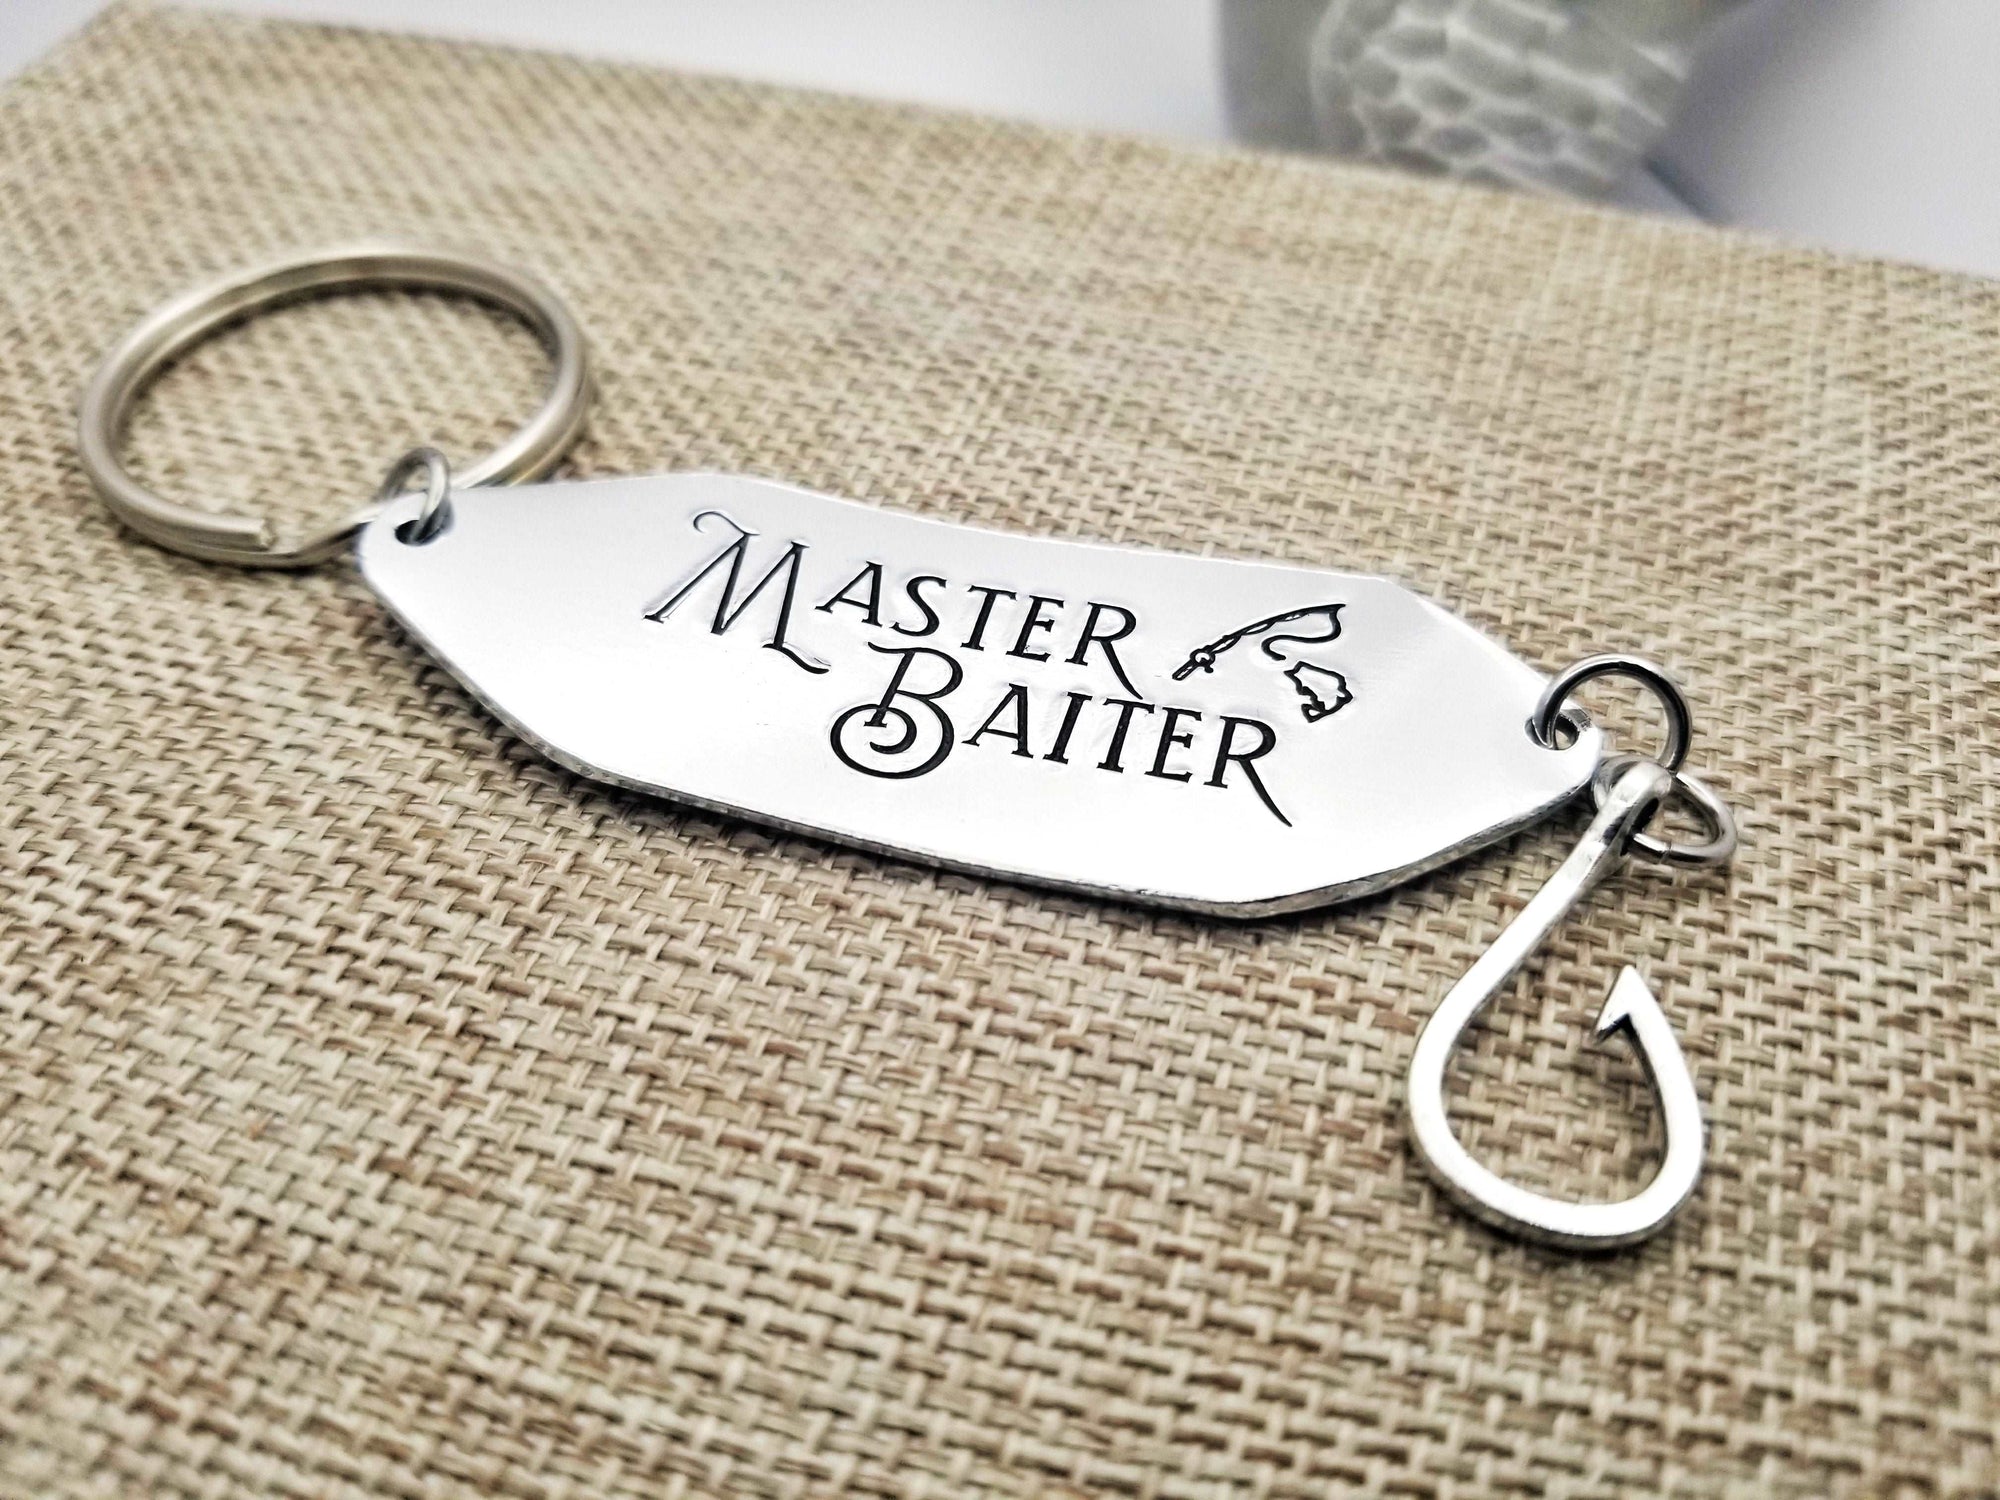 Master Baiter, Fisherman Gift, Fisherman Husband, Husband Gift, Dad Fishermen Gift, Hand stamped Men's Gift, Father's Day Gift, Gift for Him